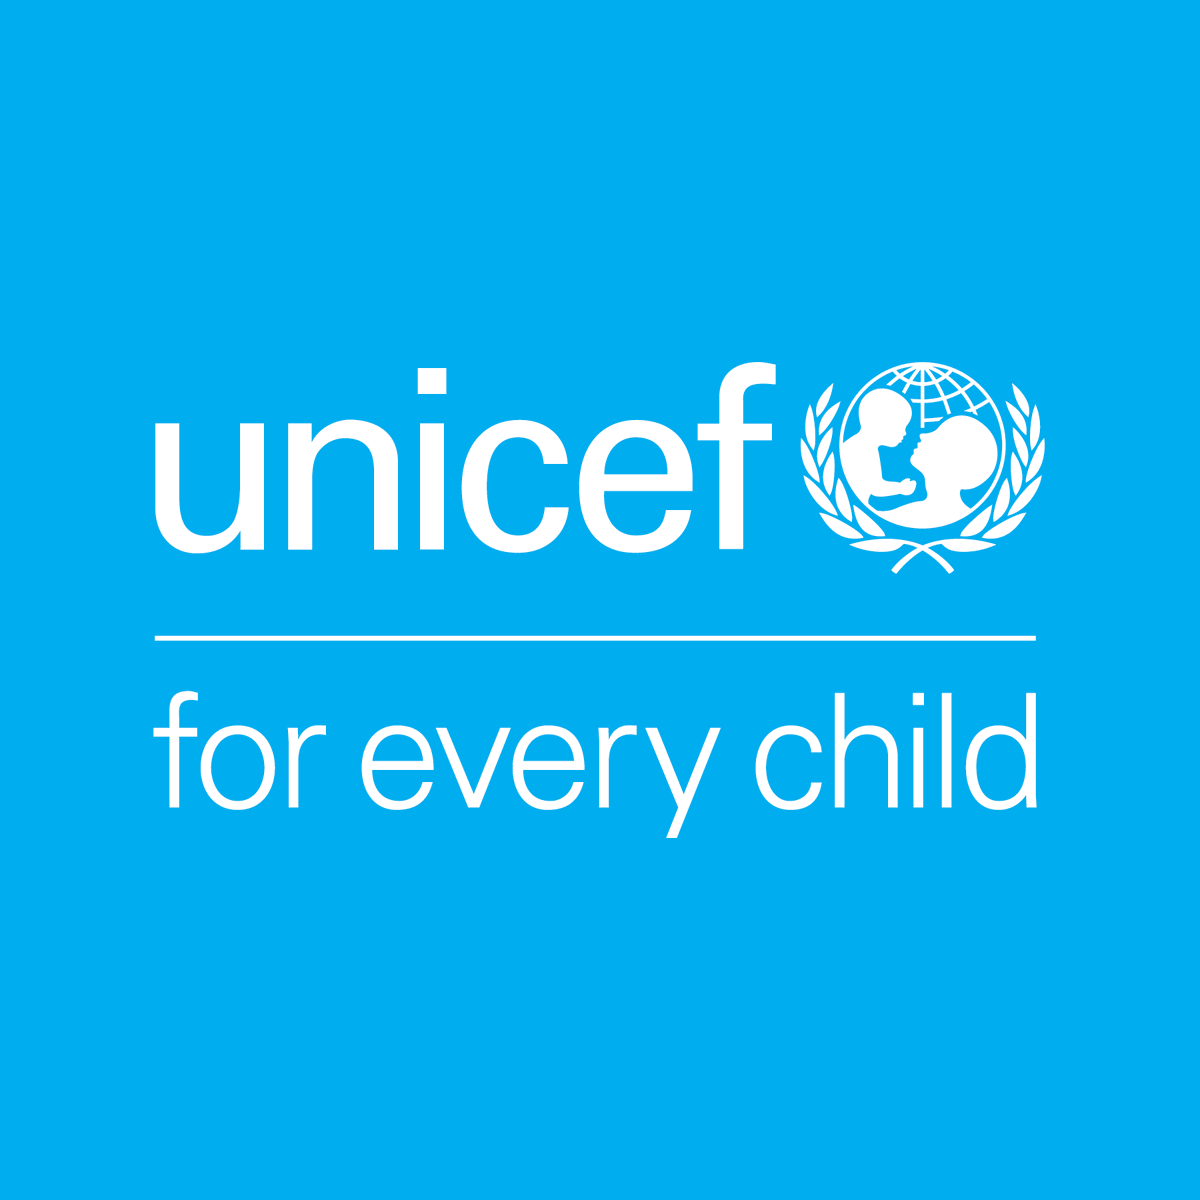 #WorkWithUs

Calling for applications for the post of an International Consultant: To Develop UNICEF Nepal Strategy on Adolescent Development and Participation for UNICEF Nepal!

Details: uni.cf/4dr8ZUO
Deadline: 13 May 2024 Nepal Standard Time